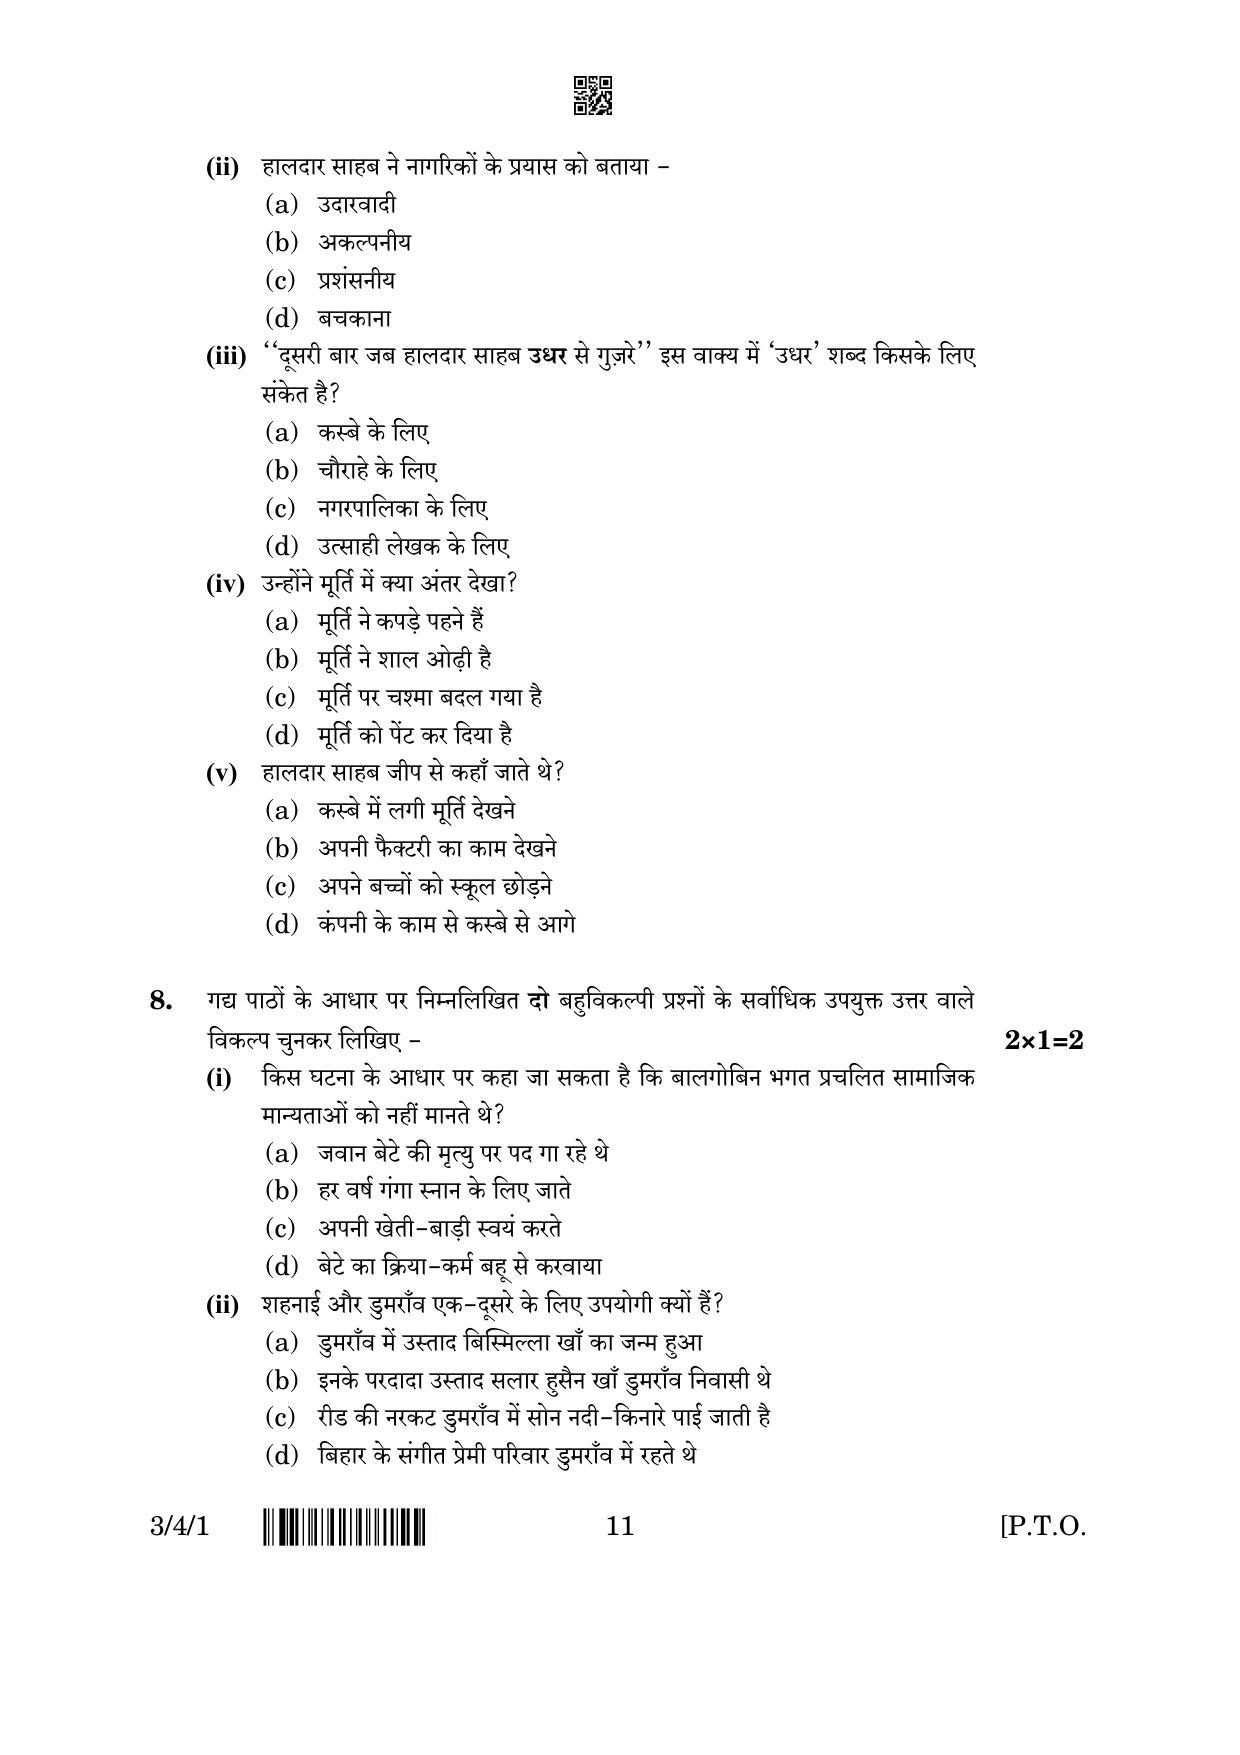 CBSE Class 10 3-4-1 Hindi A 2023 Question Paper - Page 11